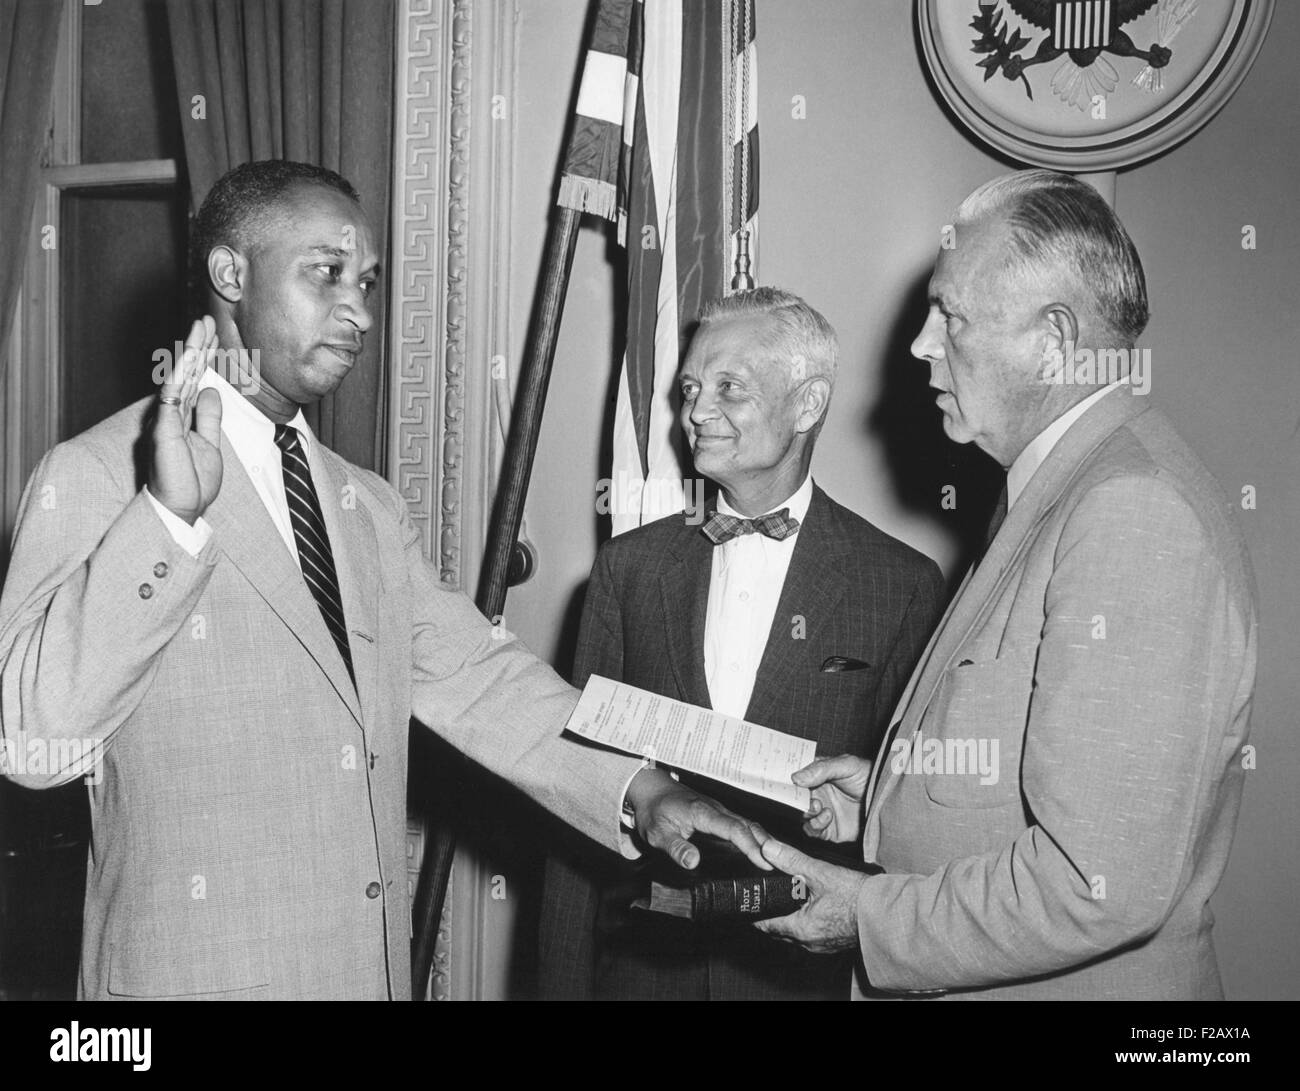 In July of 1955, Frederic Morrow became the first African American Presidential aide in history. He served as Administrative Officer for Special projects on President Eisenhower’s staff from 1955 to 1961. The Montgomery Bus Boycott and Little Rock Crisis were the backdrop for Morrow’s White House years,Chief of Staff Sherman Adams (ctr)- (BSLOC 2014 16 118) Stock Photo